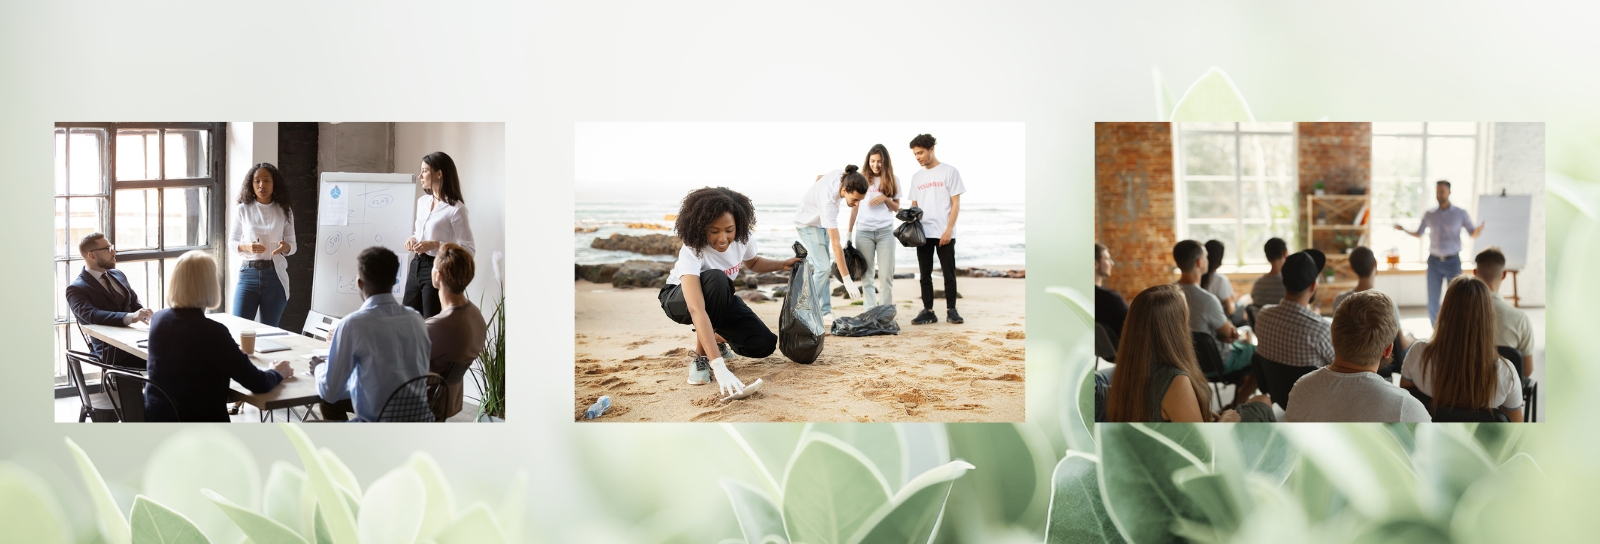 Greenery background with three images in the foreground - two of people in group meetings and one of a divers group cleaning up a beach